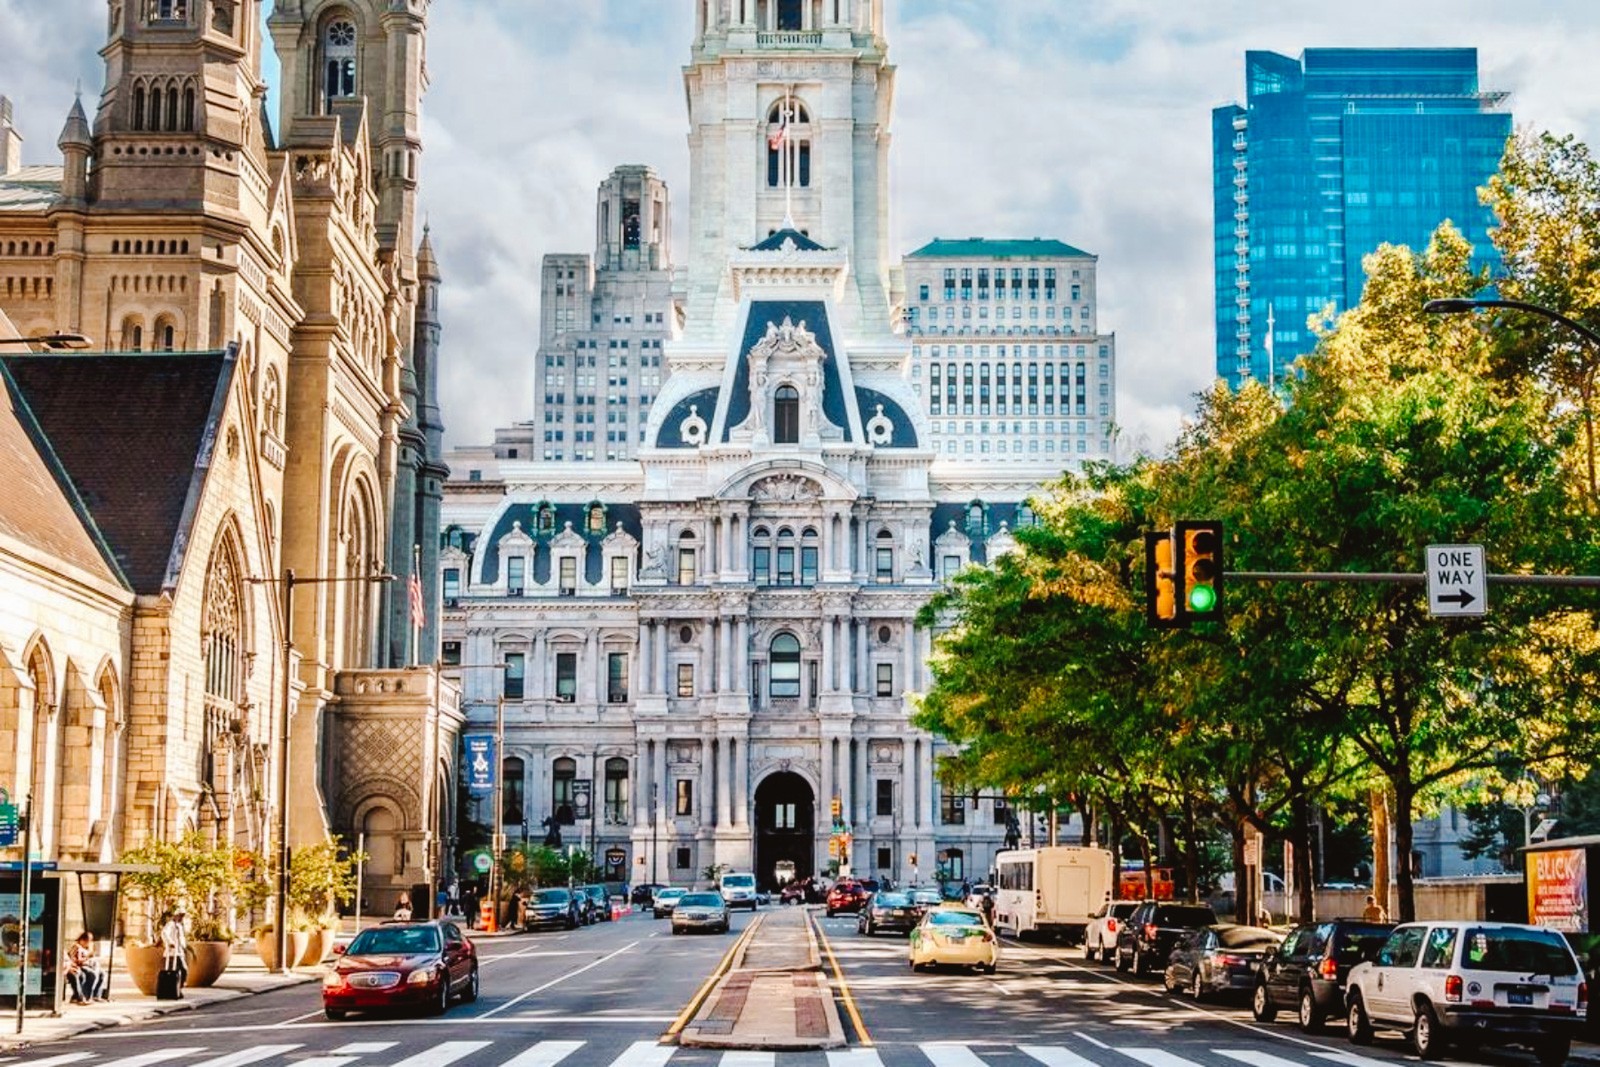 Beautiful buildings in Philadelphia on a sunny day with one white building centered with a street leading to it, trees on the right, and an old church with more beautiful historic architecture on the left